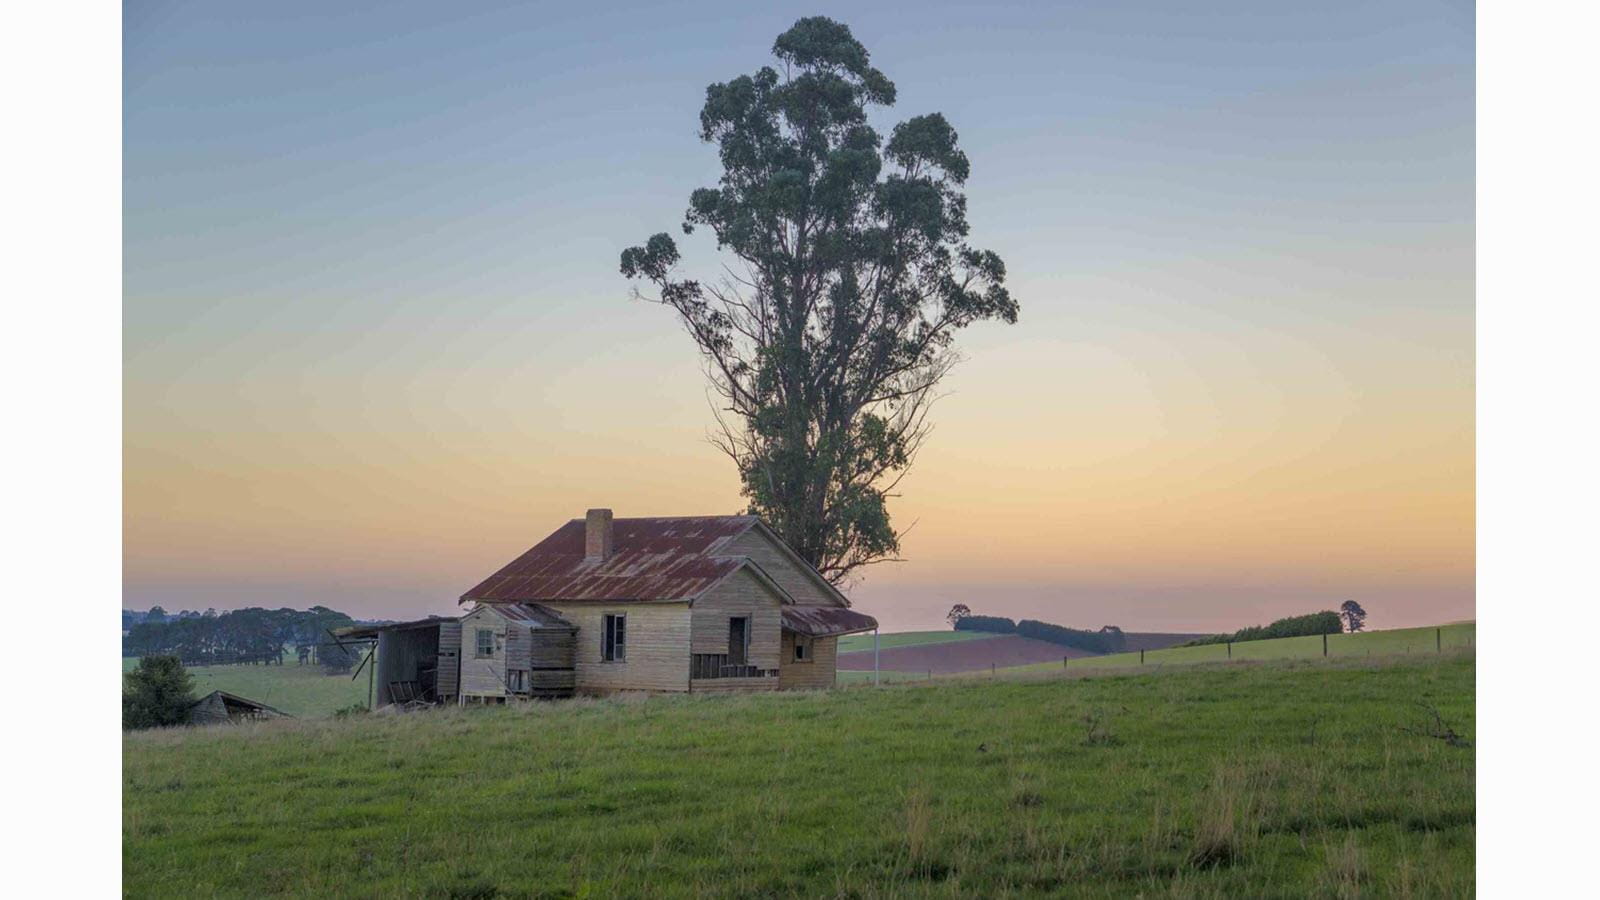 Home set against the transitioning sky in Gippsland, Victoria, Australia